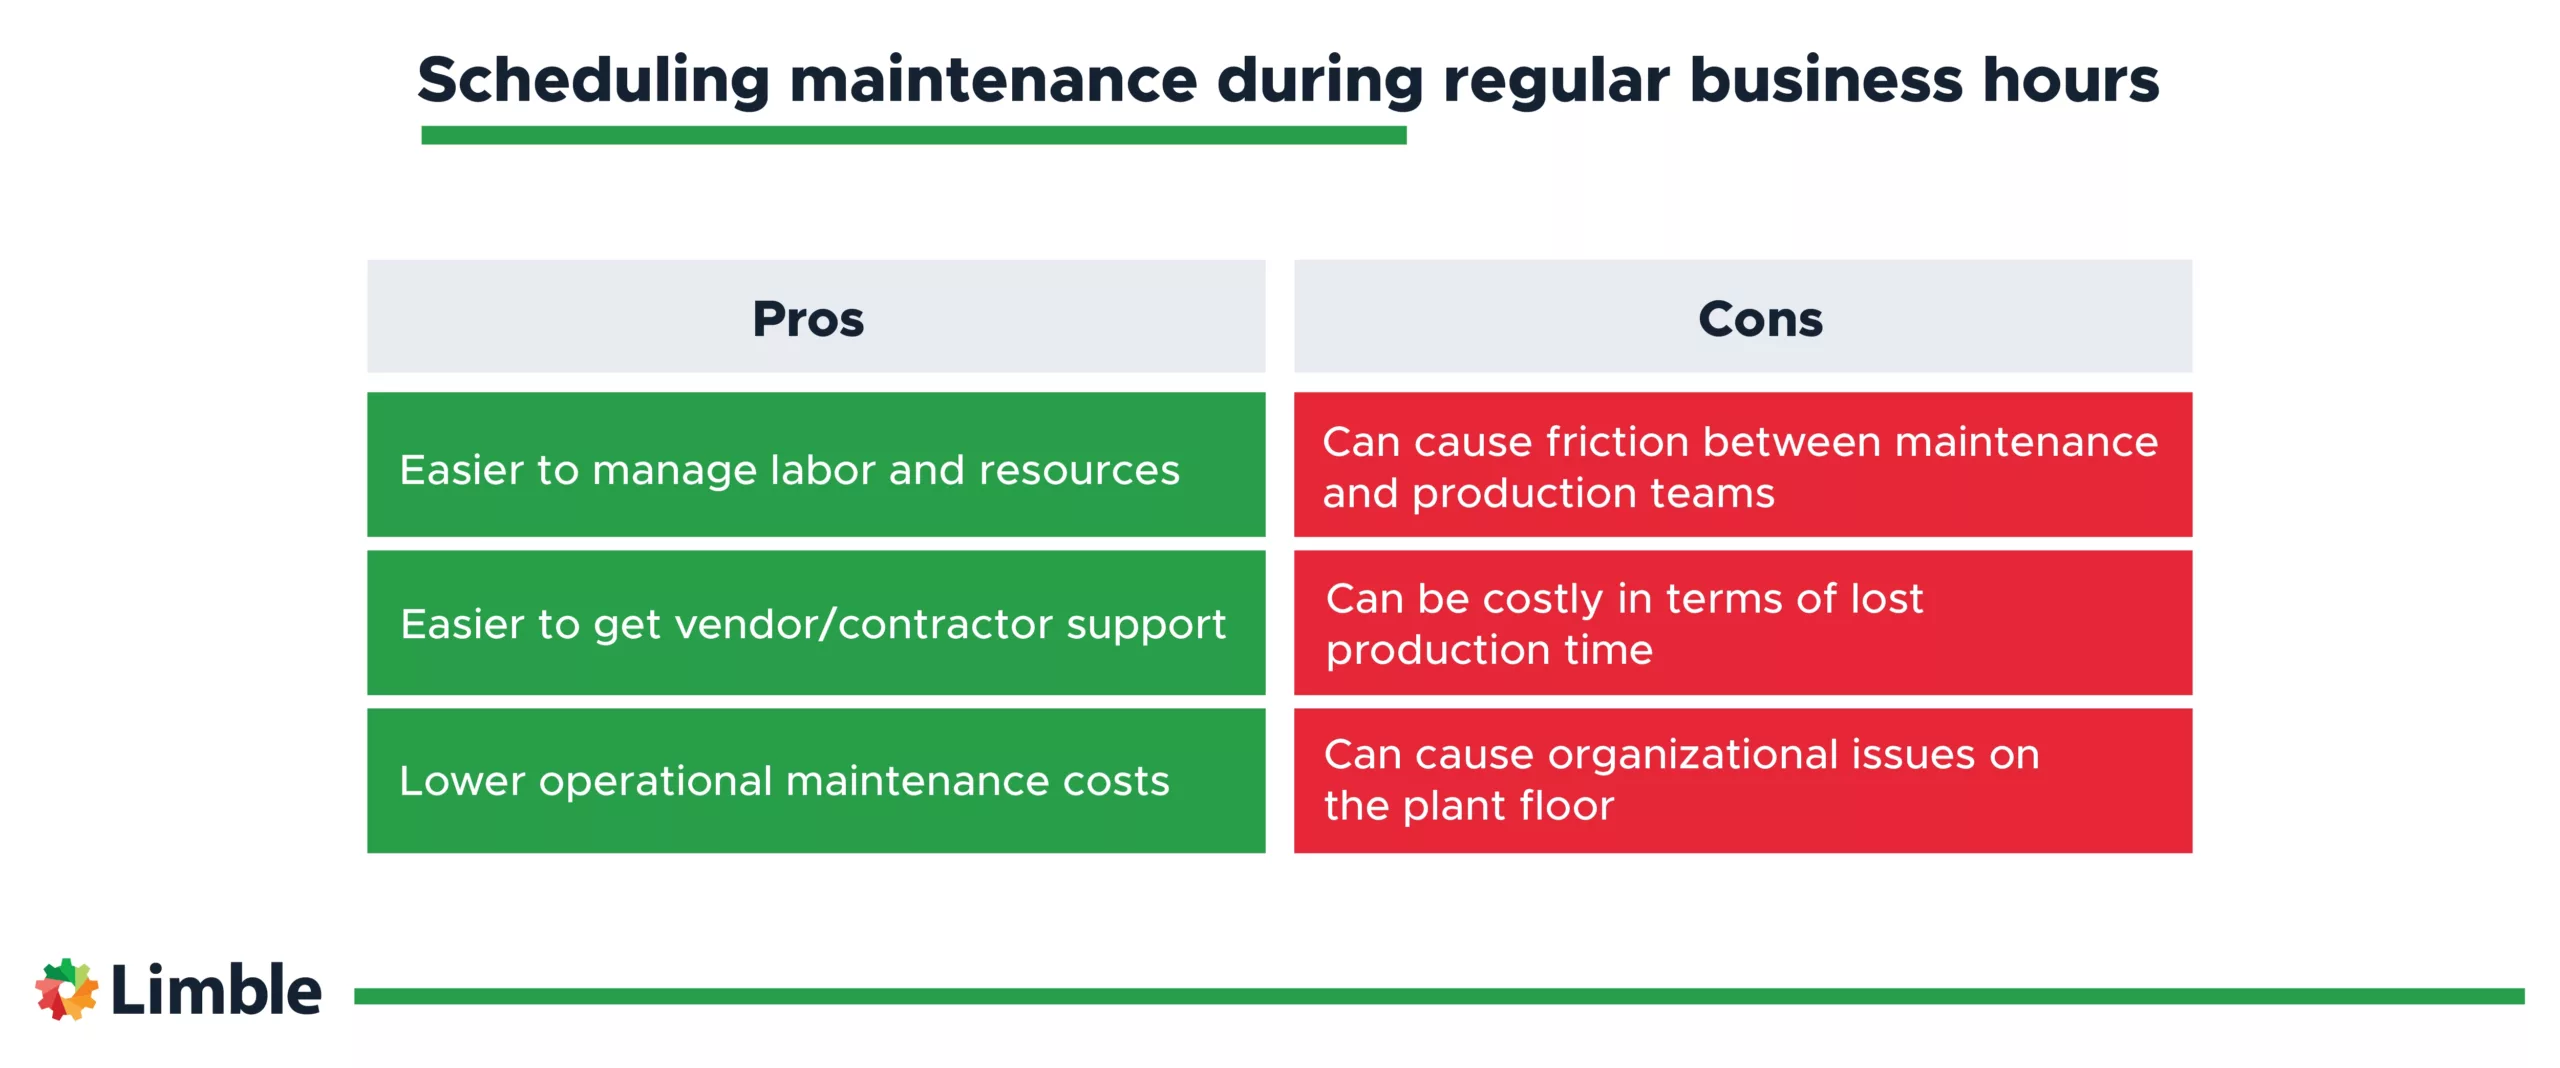 Pros and cons of scheduling a maintenance window during regular business hours.